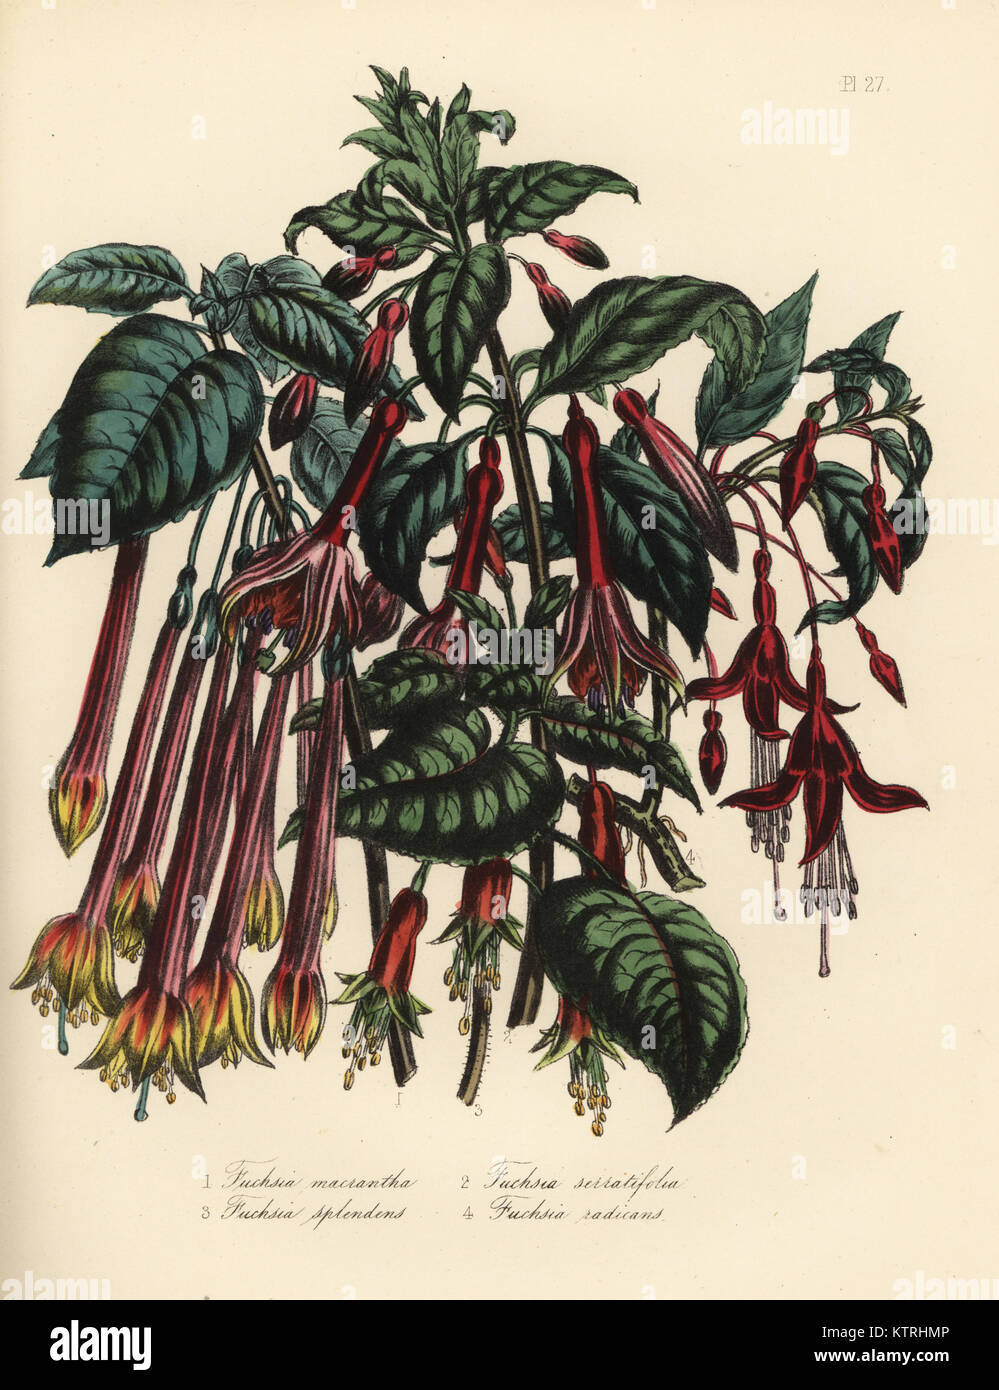 Long-flowered fuchsia, Fuchsia macrantha, serrated-leaved, Fuchsia serratifolia, splendid, Fuchsia splendens, and rooting fuchsia, Fuchsia radicans. Handfinished chromolithograph by Henry Noel Humphreys after an illustration by Jane Loudon from Mrs. Jane Loudon's Ladies Flower Garden or Ornamental Greenhouse Plants, William S. Orr, London, 1849. Stock Photo